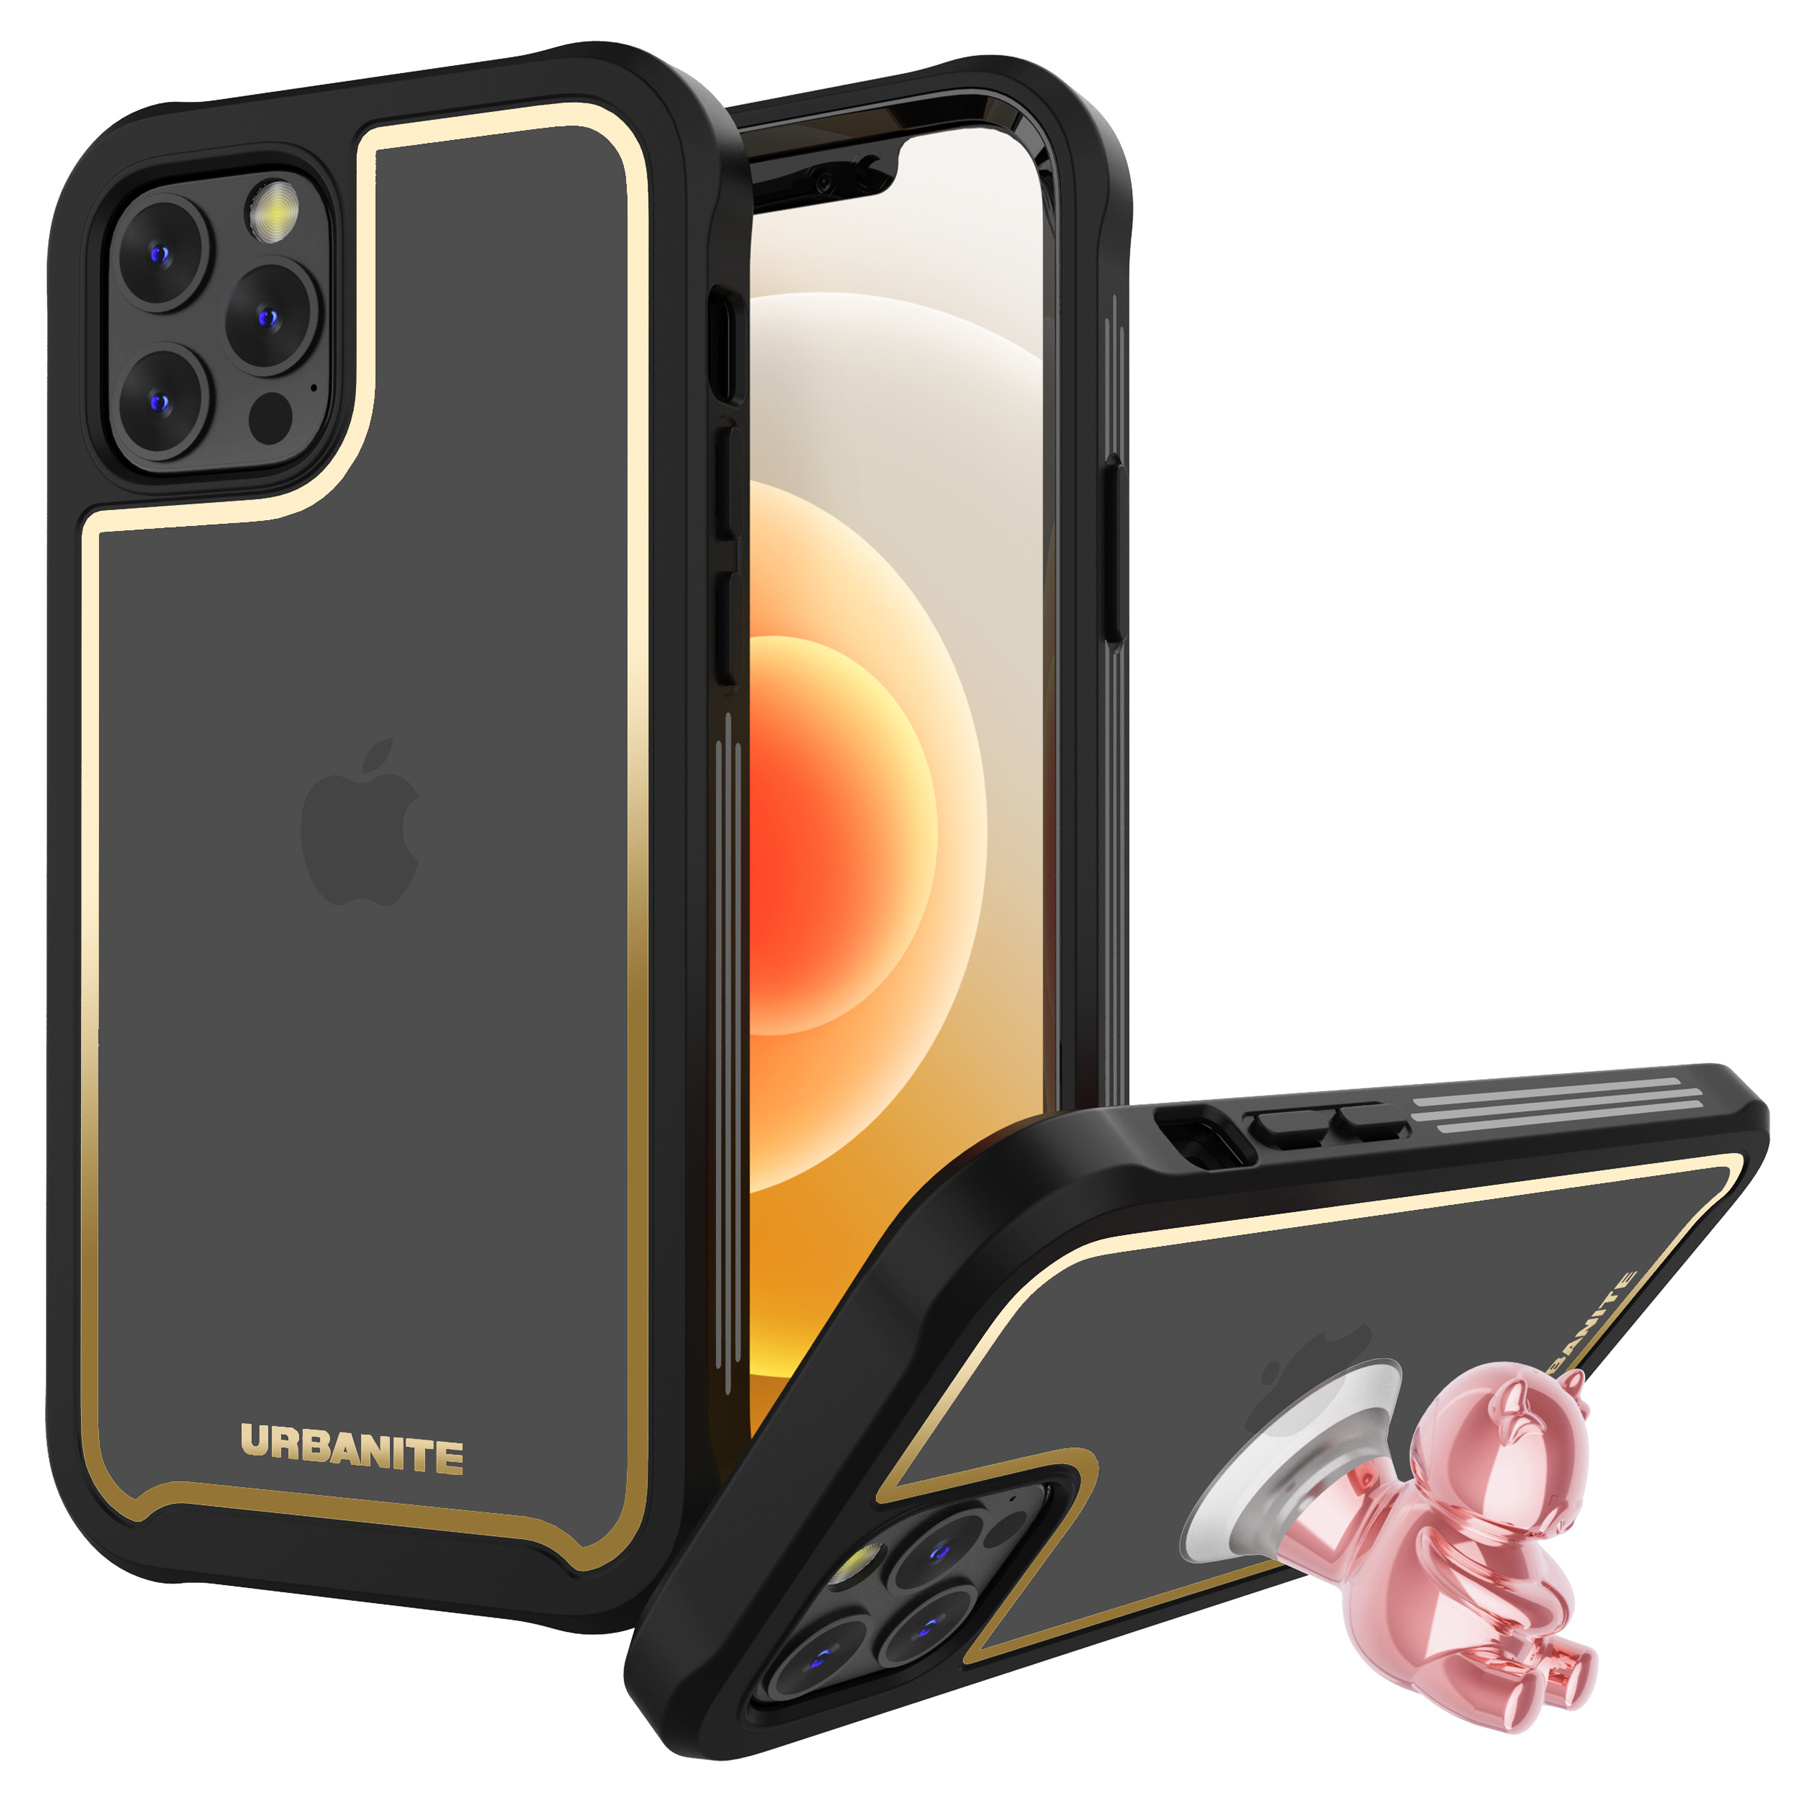  Clear iPhone 12 Case/iPhone 12 Pro Case with Built-in